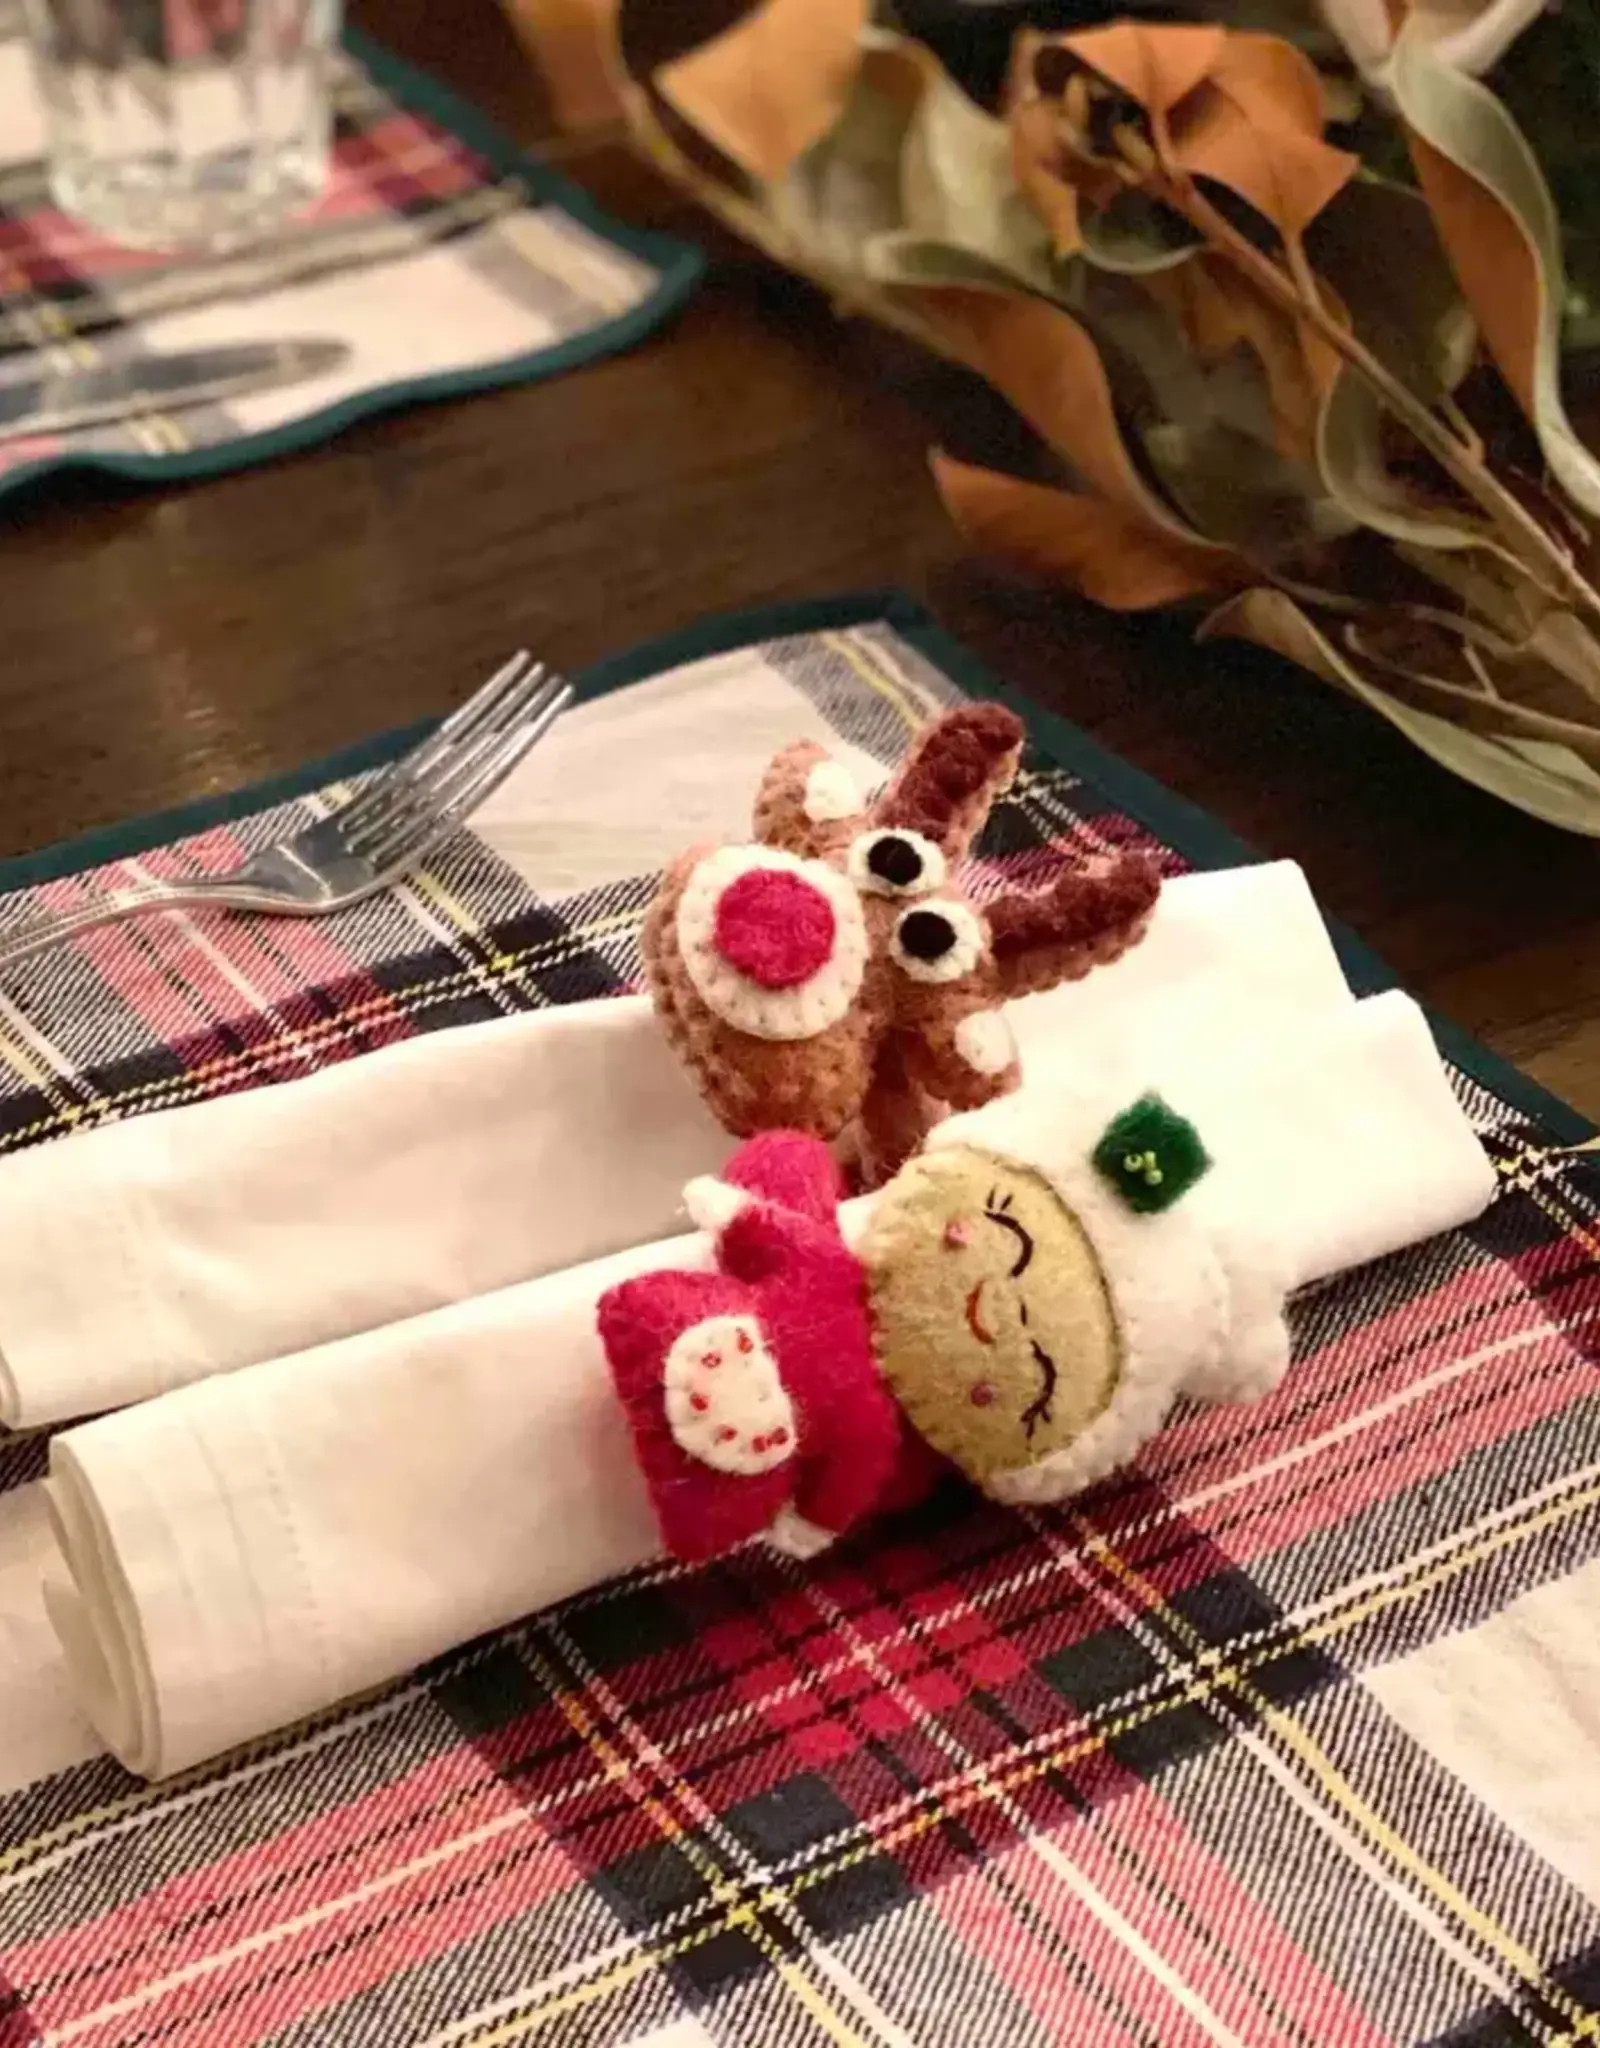 Global Crafts Christmas Rudolph Napkin Rings